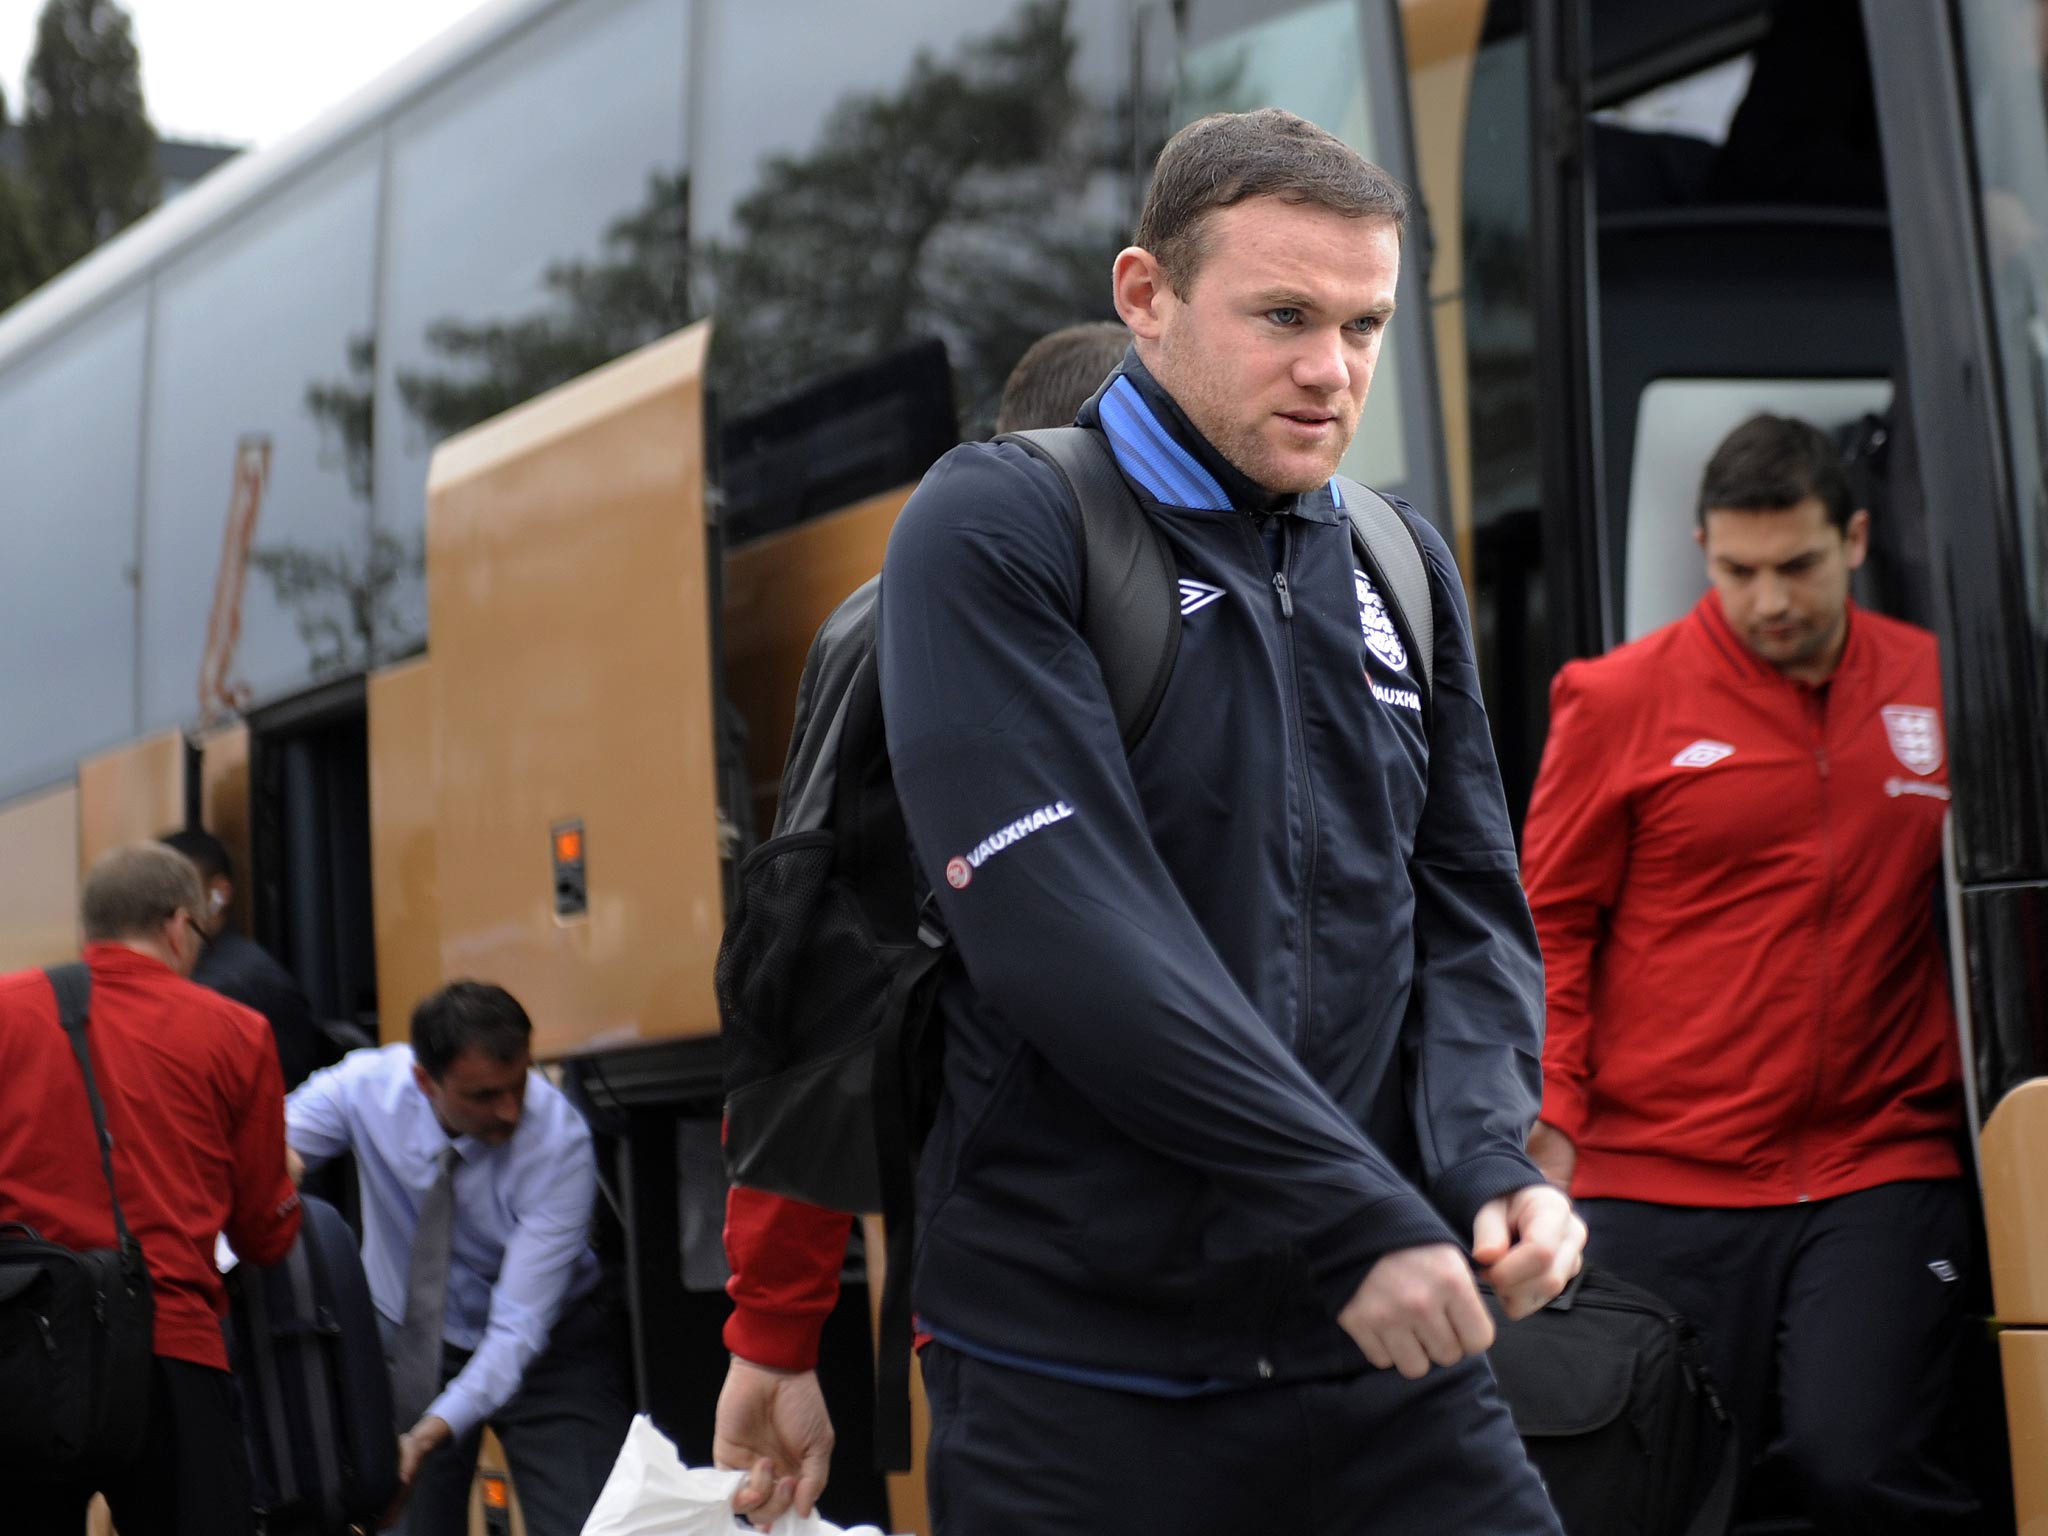 Wayne Rooney is pictured at the arrival of the England national football team in Podgorica